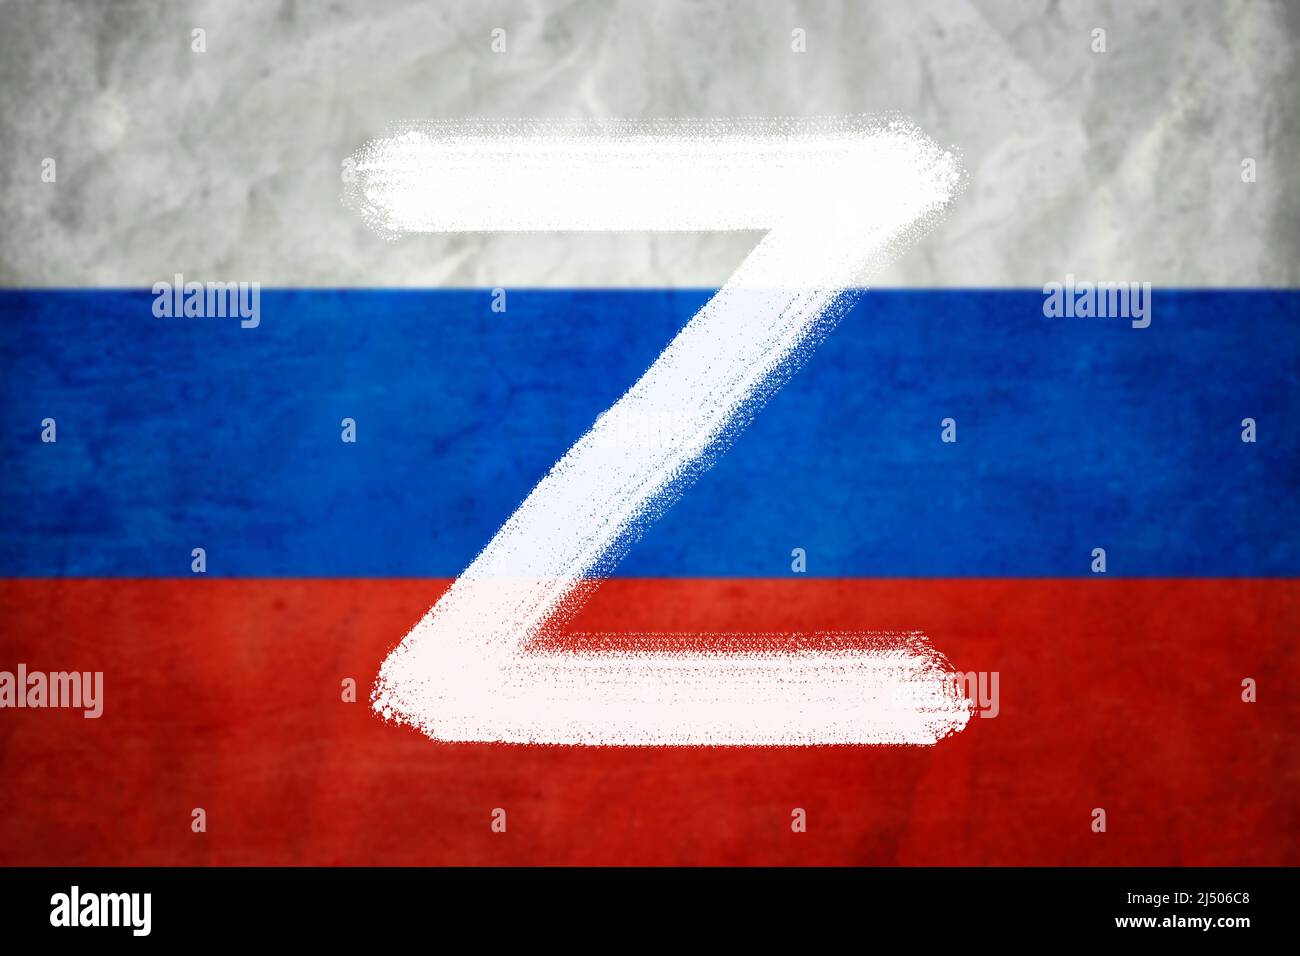 Letter Z on Russian flag background, military symbol of Russia used in Russia-Ukraine war. Painted logo Z for Russian army force. Concept of World fam Stock Photo